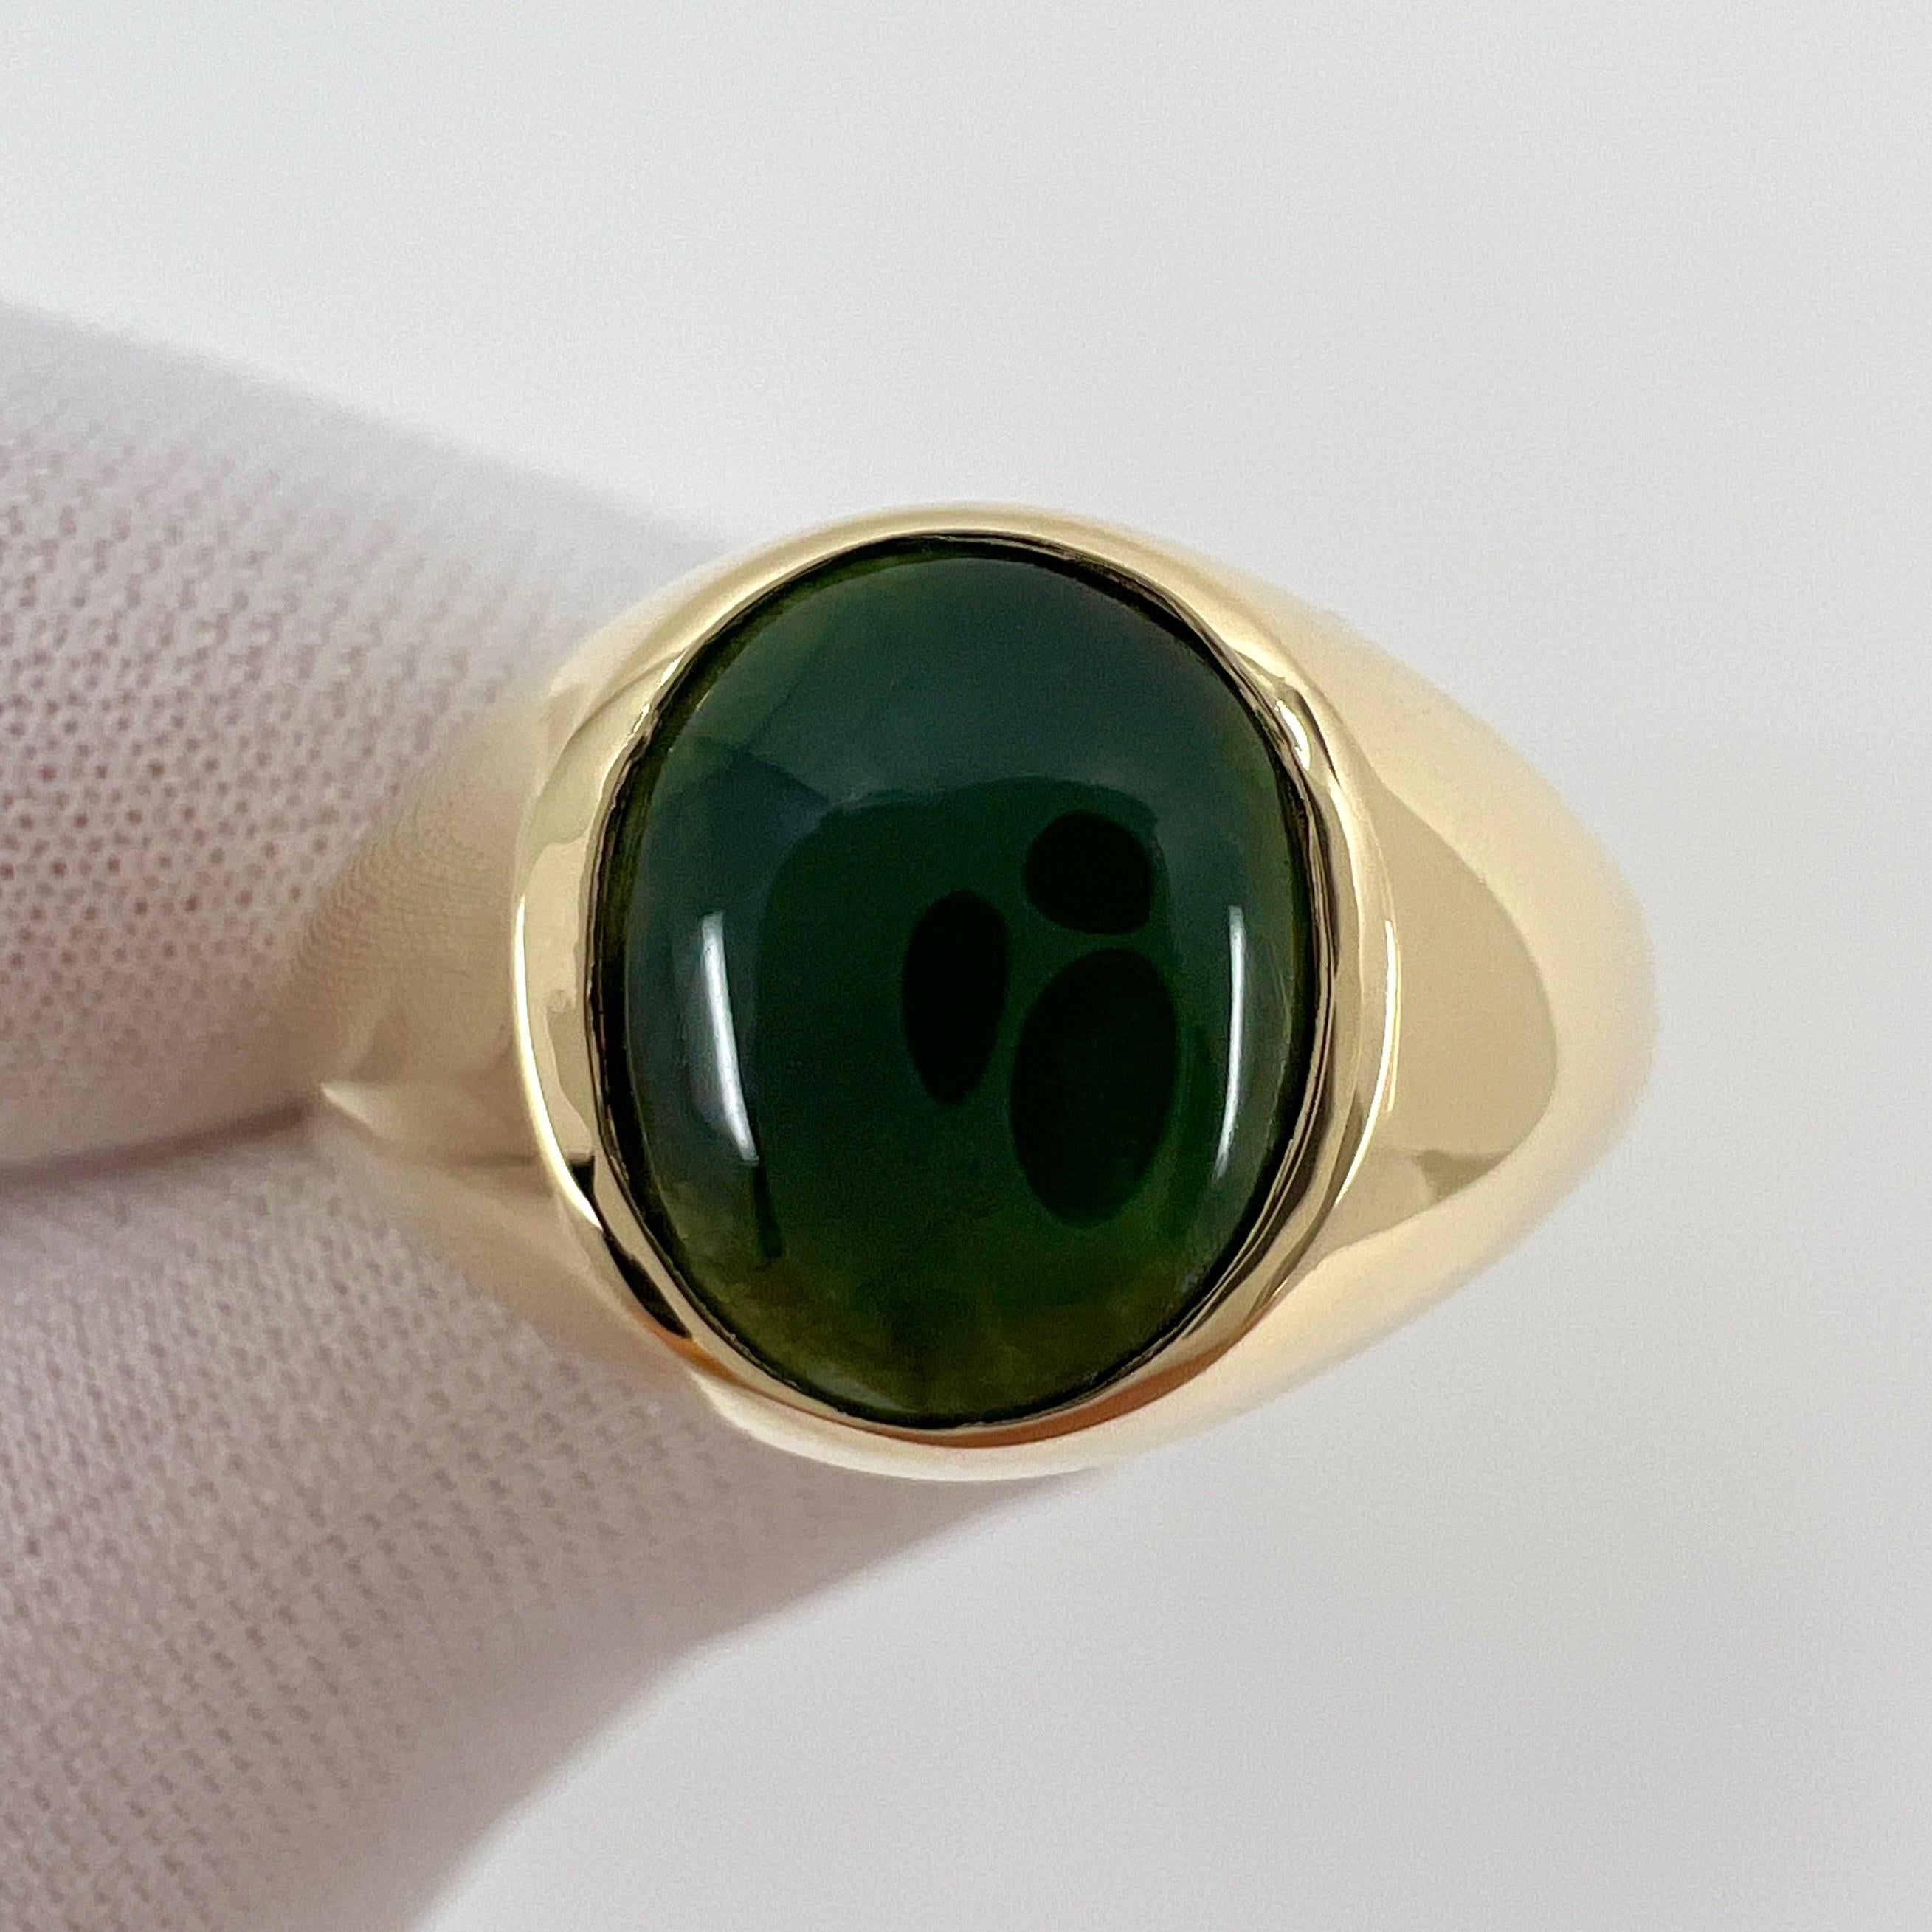 IGI Certified A-Grade Deep Green Jadeite 9k Yellow Gold Signet Ring.

A stunning 1.89 carat untreated deep green jadeite jade set in a fine 9k yellow gold rubover bezel signet ring.

This jade has an excellent oval cabochon cut showing the colour